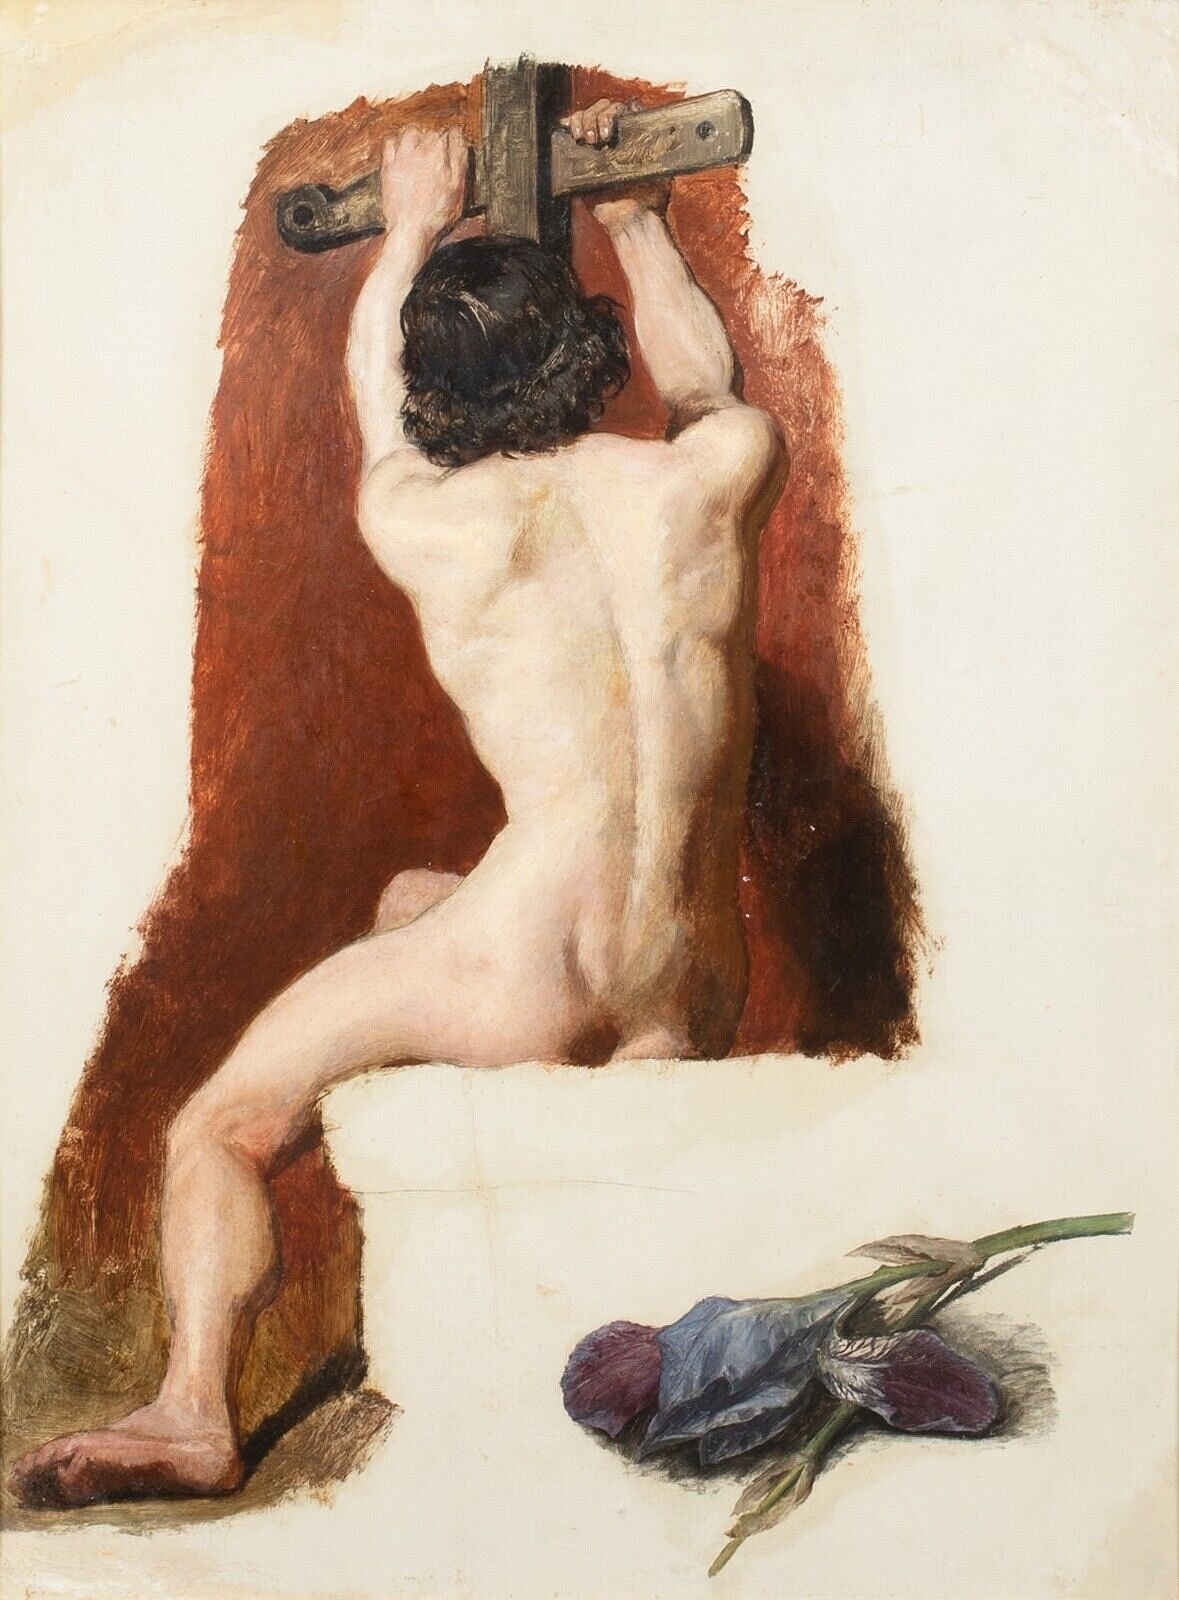 PORTRAIT OF A NUDE MALE HOLDING A CRUCIFIX OIL PAINTING - William Etty